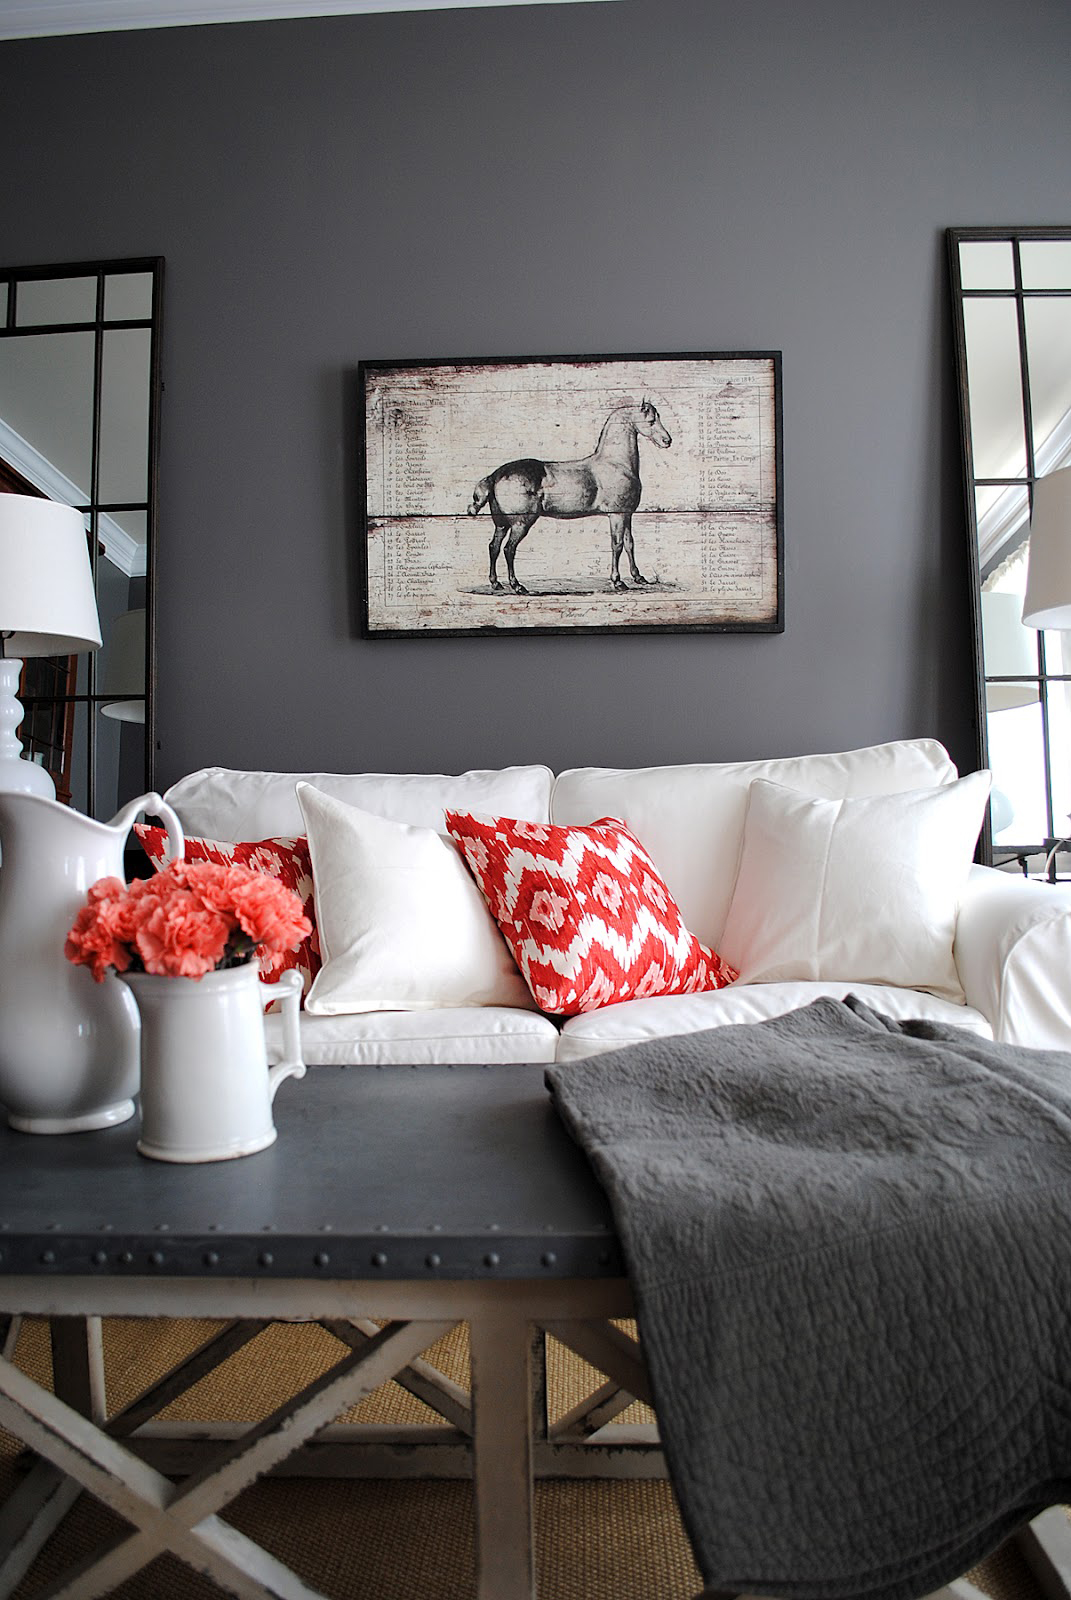 Sherwin Williams Gray Living Room with White sofa and horse print